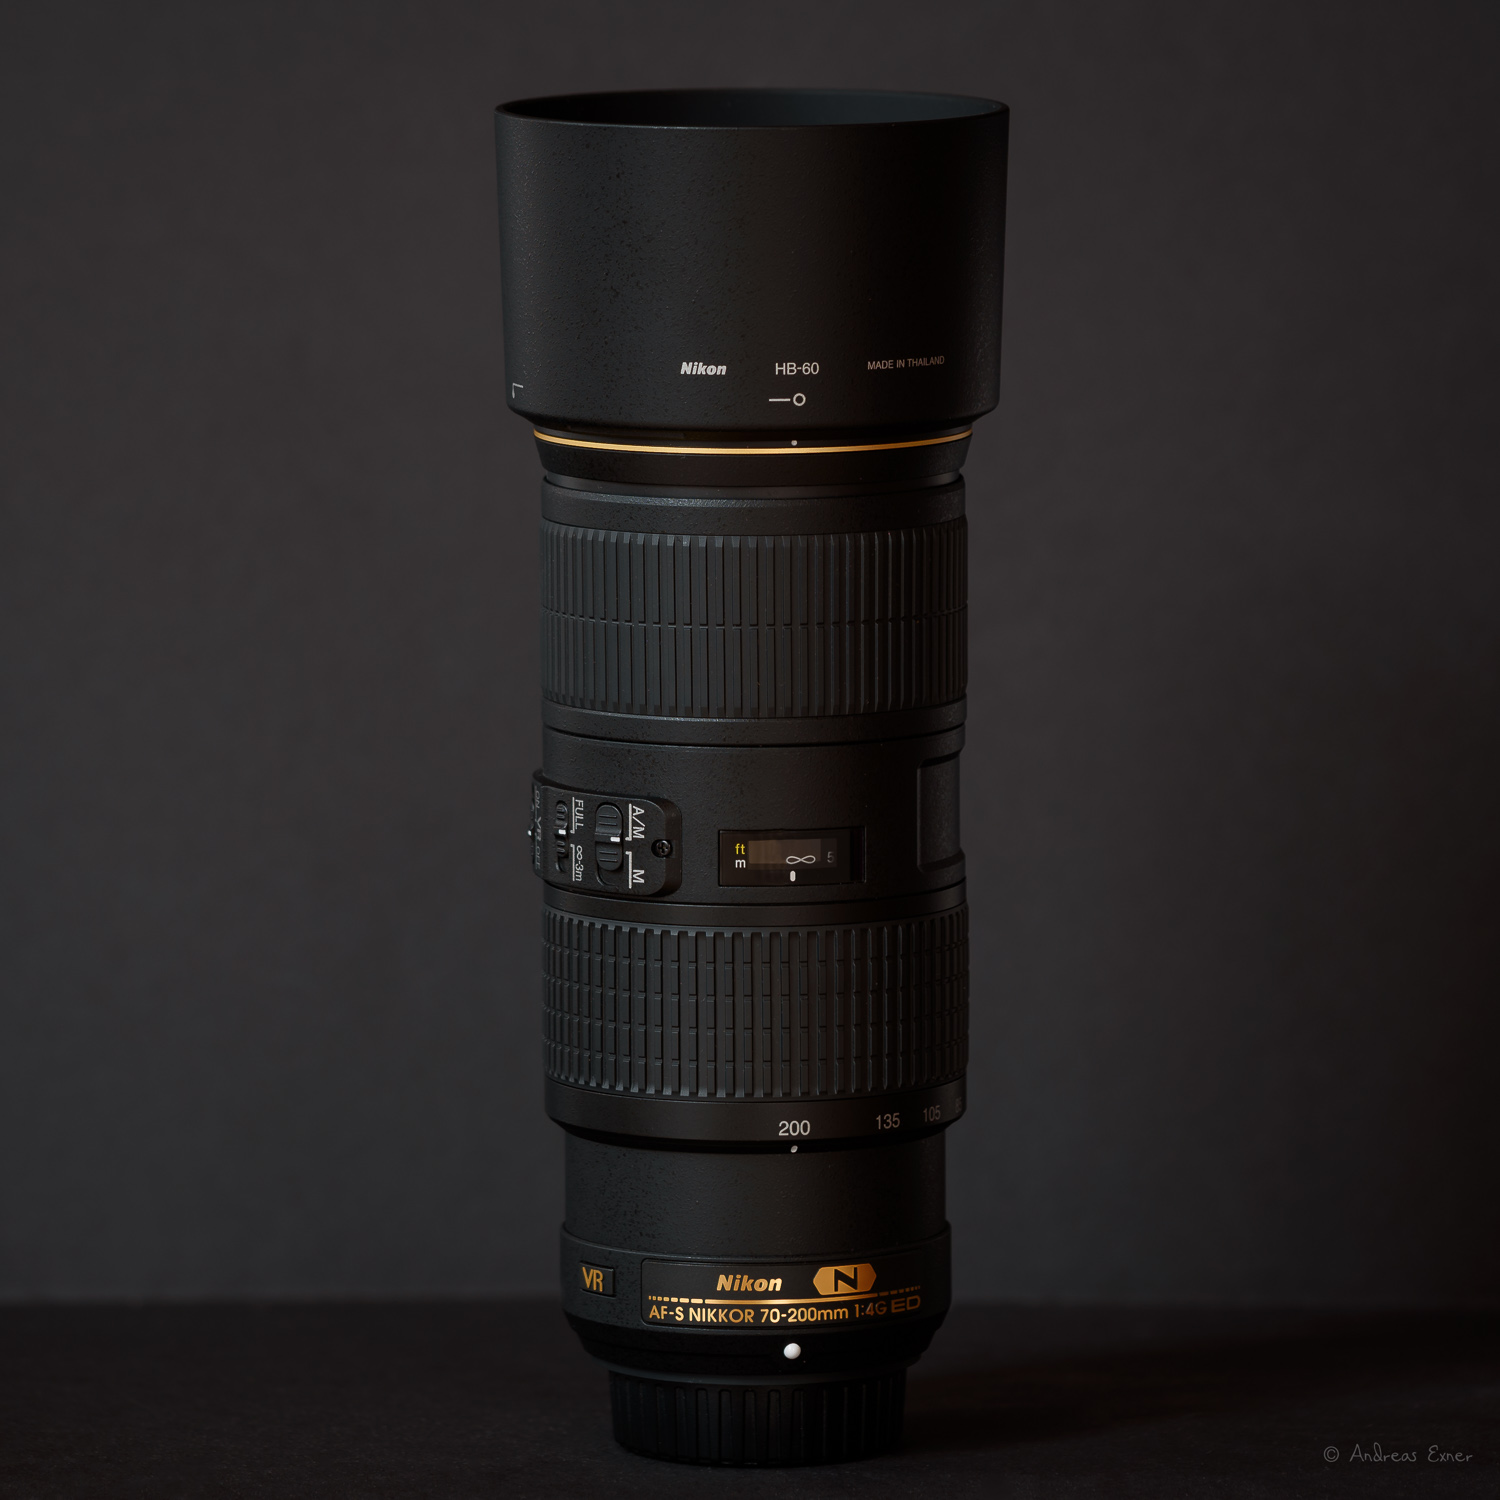  NIKON AF-S Nikkor 70-200mm, f/4G ED VR  I have acquired this lens mainly for my landscape and travel photography, but its light weight makes it very versatile and I started using it for wildlife as well. Sharp and fast focus.  ★ ★ ★ ★ ★&nbsp; 